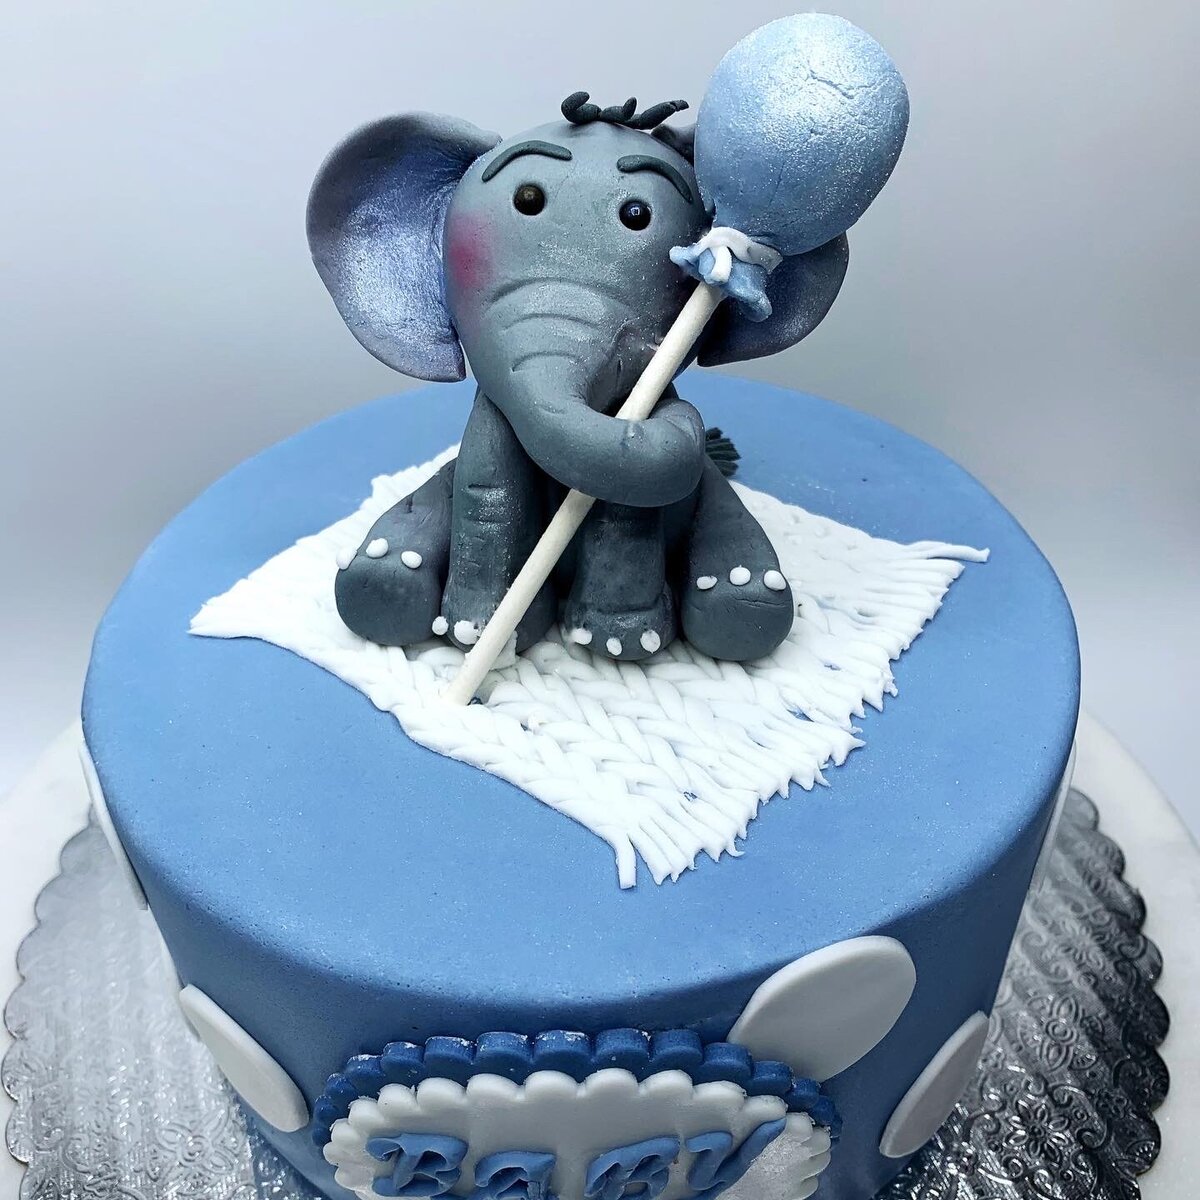 Hand modeled baby elephant holding a blue balloon sitting on top of blue decorated cake